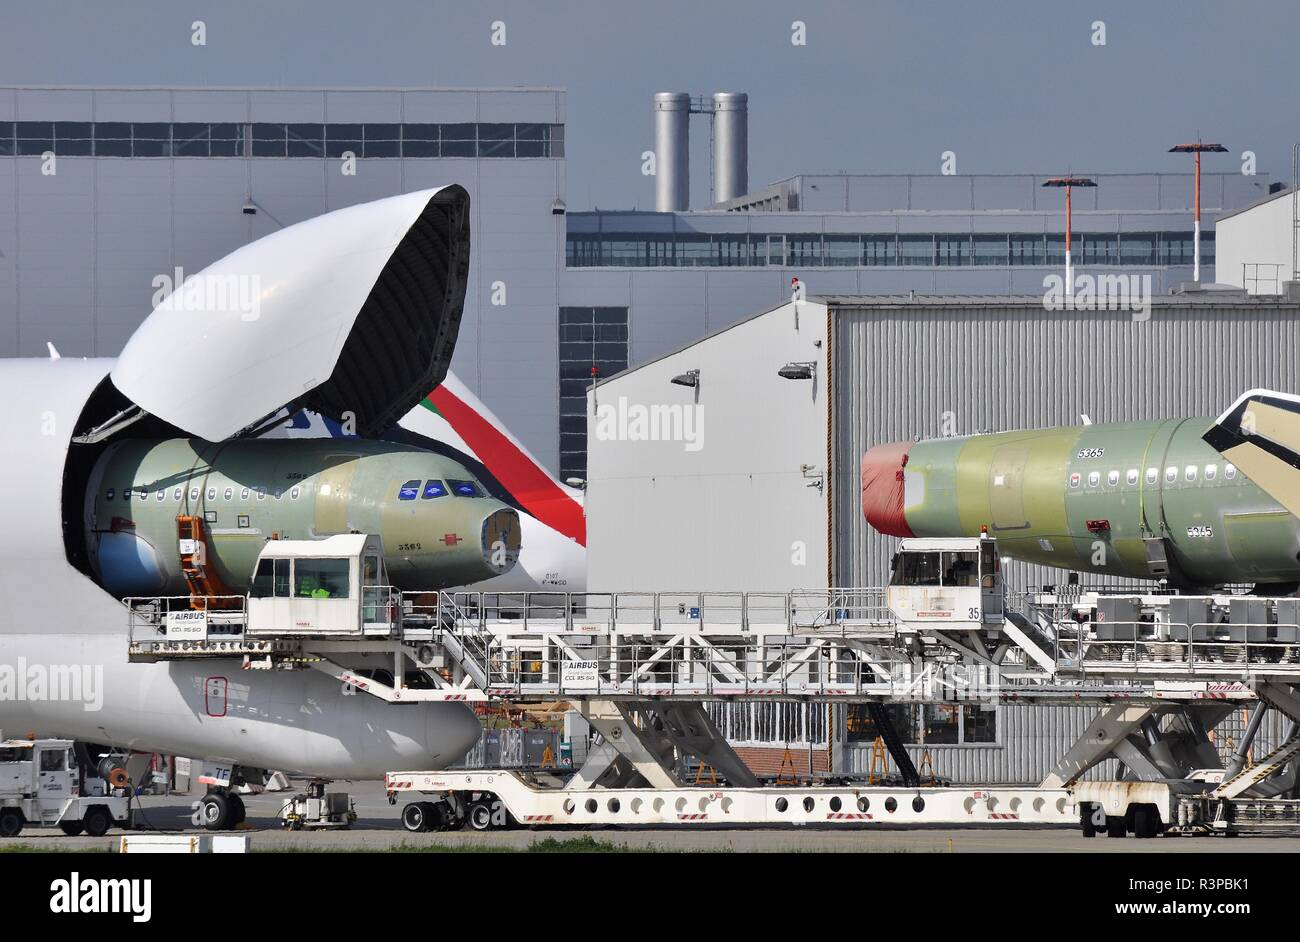 AIRBUS A320 FUSELAGES BEING UNLOADED FROM BELUGA FREIGHTER FOR FINAL ASSEMBLY AT FINKENWERDER. Stock Photo